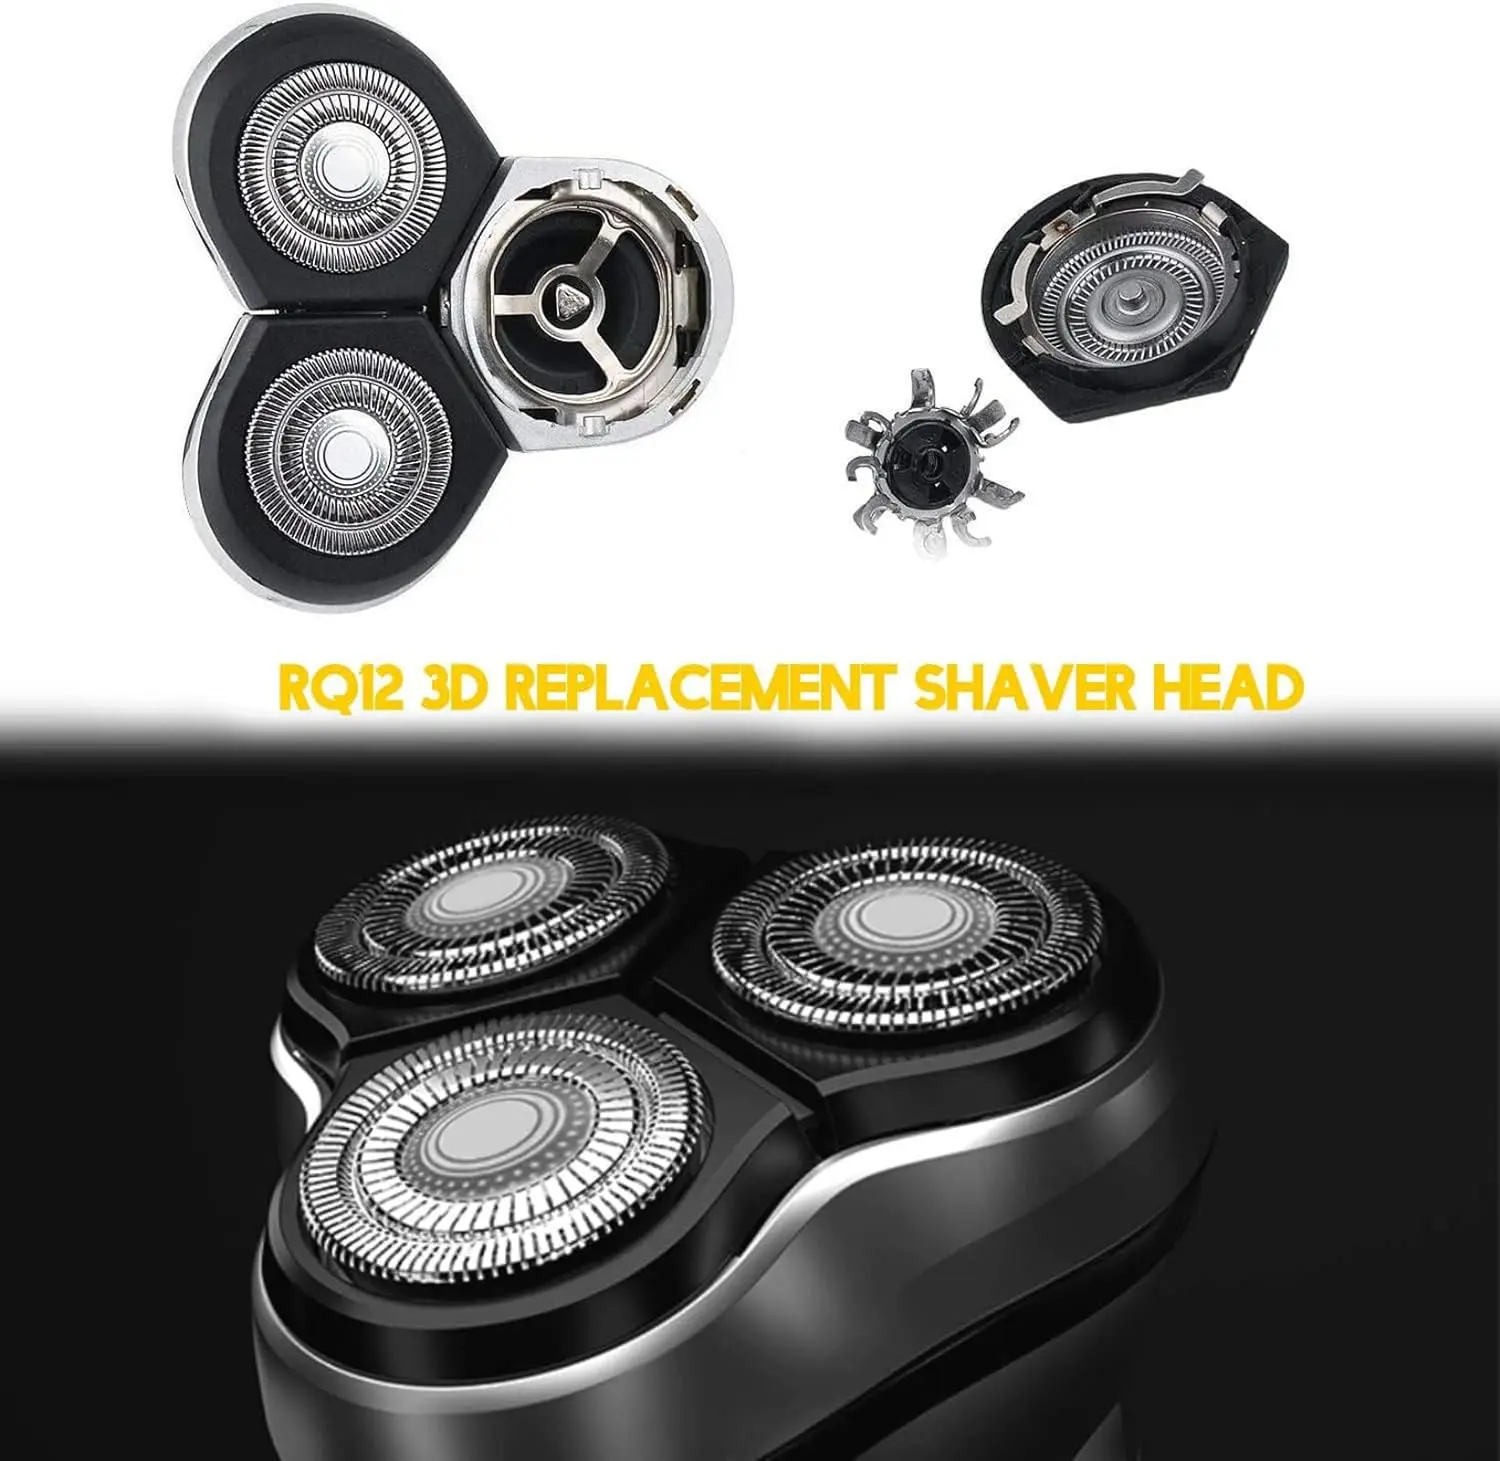 RQ12 Replacement Shaver Head Compatible with Philipss Norelcos RQ11 RQ10 Sensotouch 3D 1260X RQ1250 RQ1295